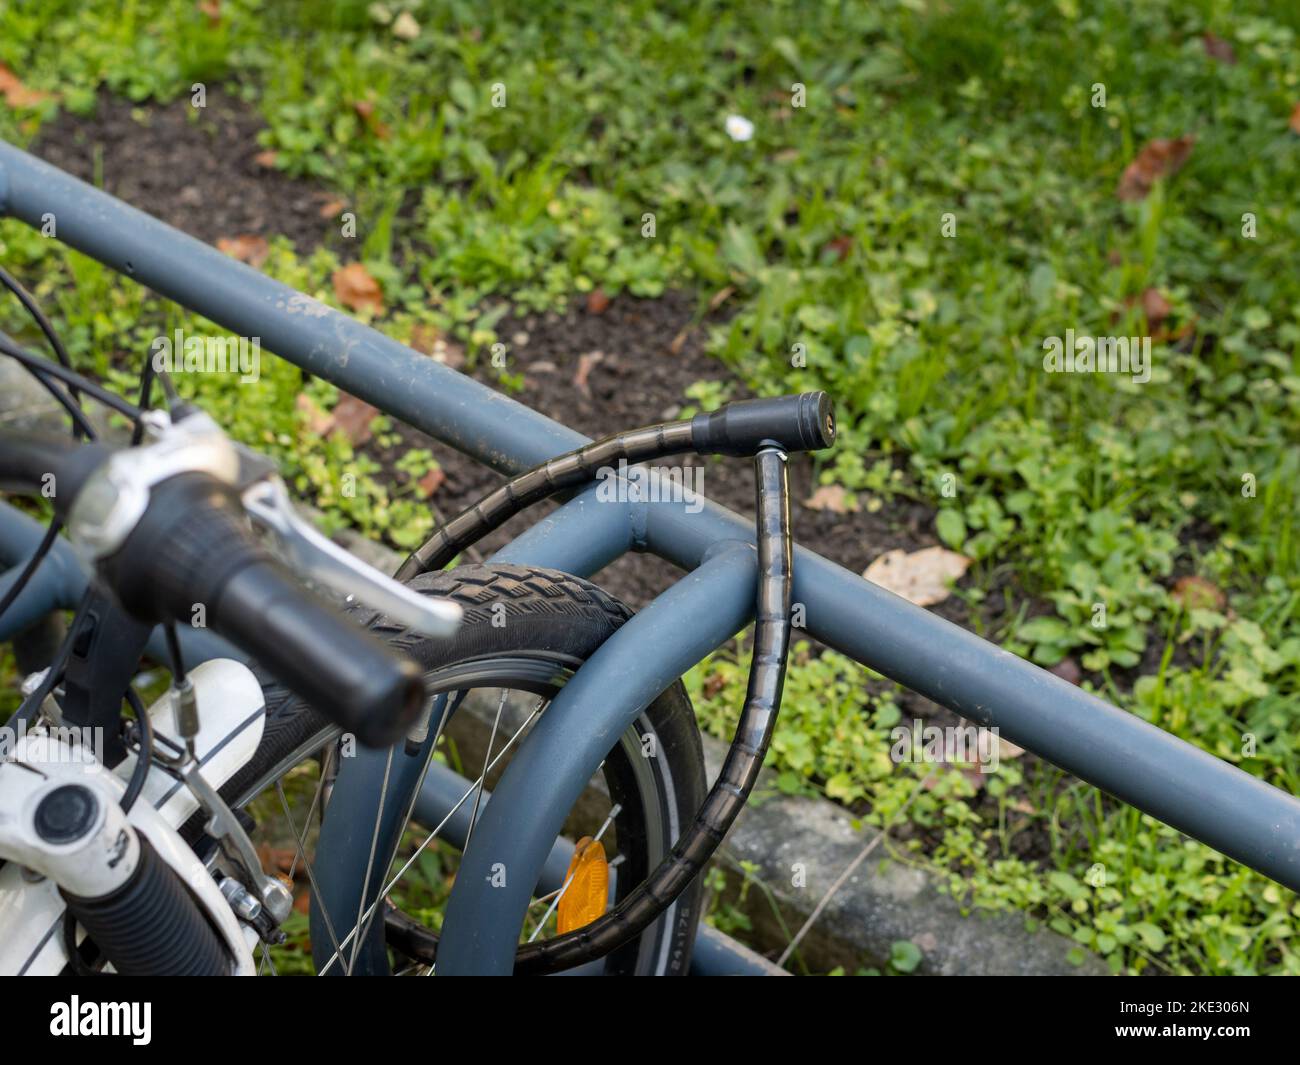 Bicycle lock through the front wheel. The lock is closed and protecting the bike from theft. The prevention is very weak if the wheel is removed. Stock Photo